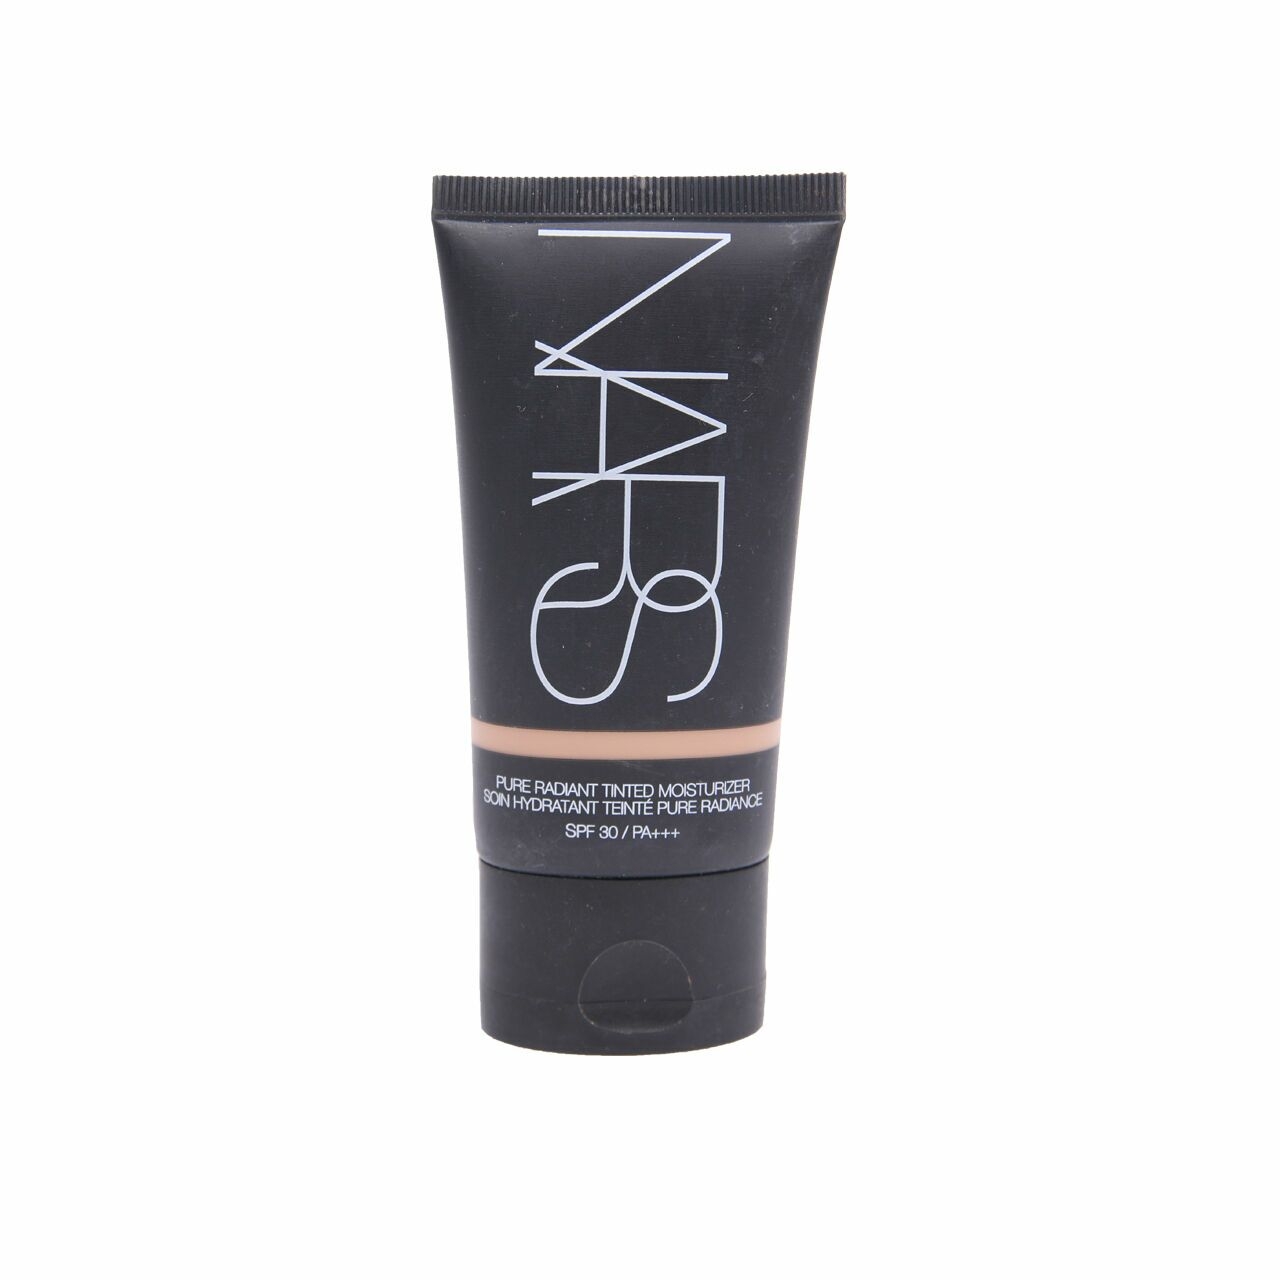 Nars Light 3 Groenland Pure Radiant Tinted Moizturizer Faces